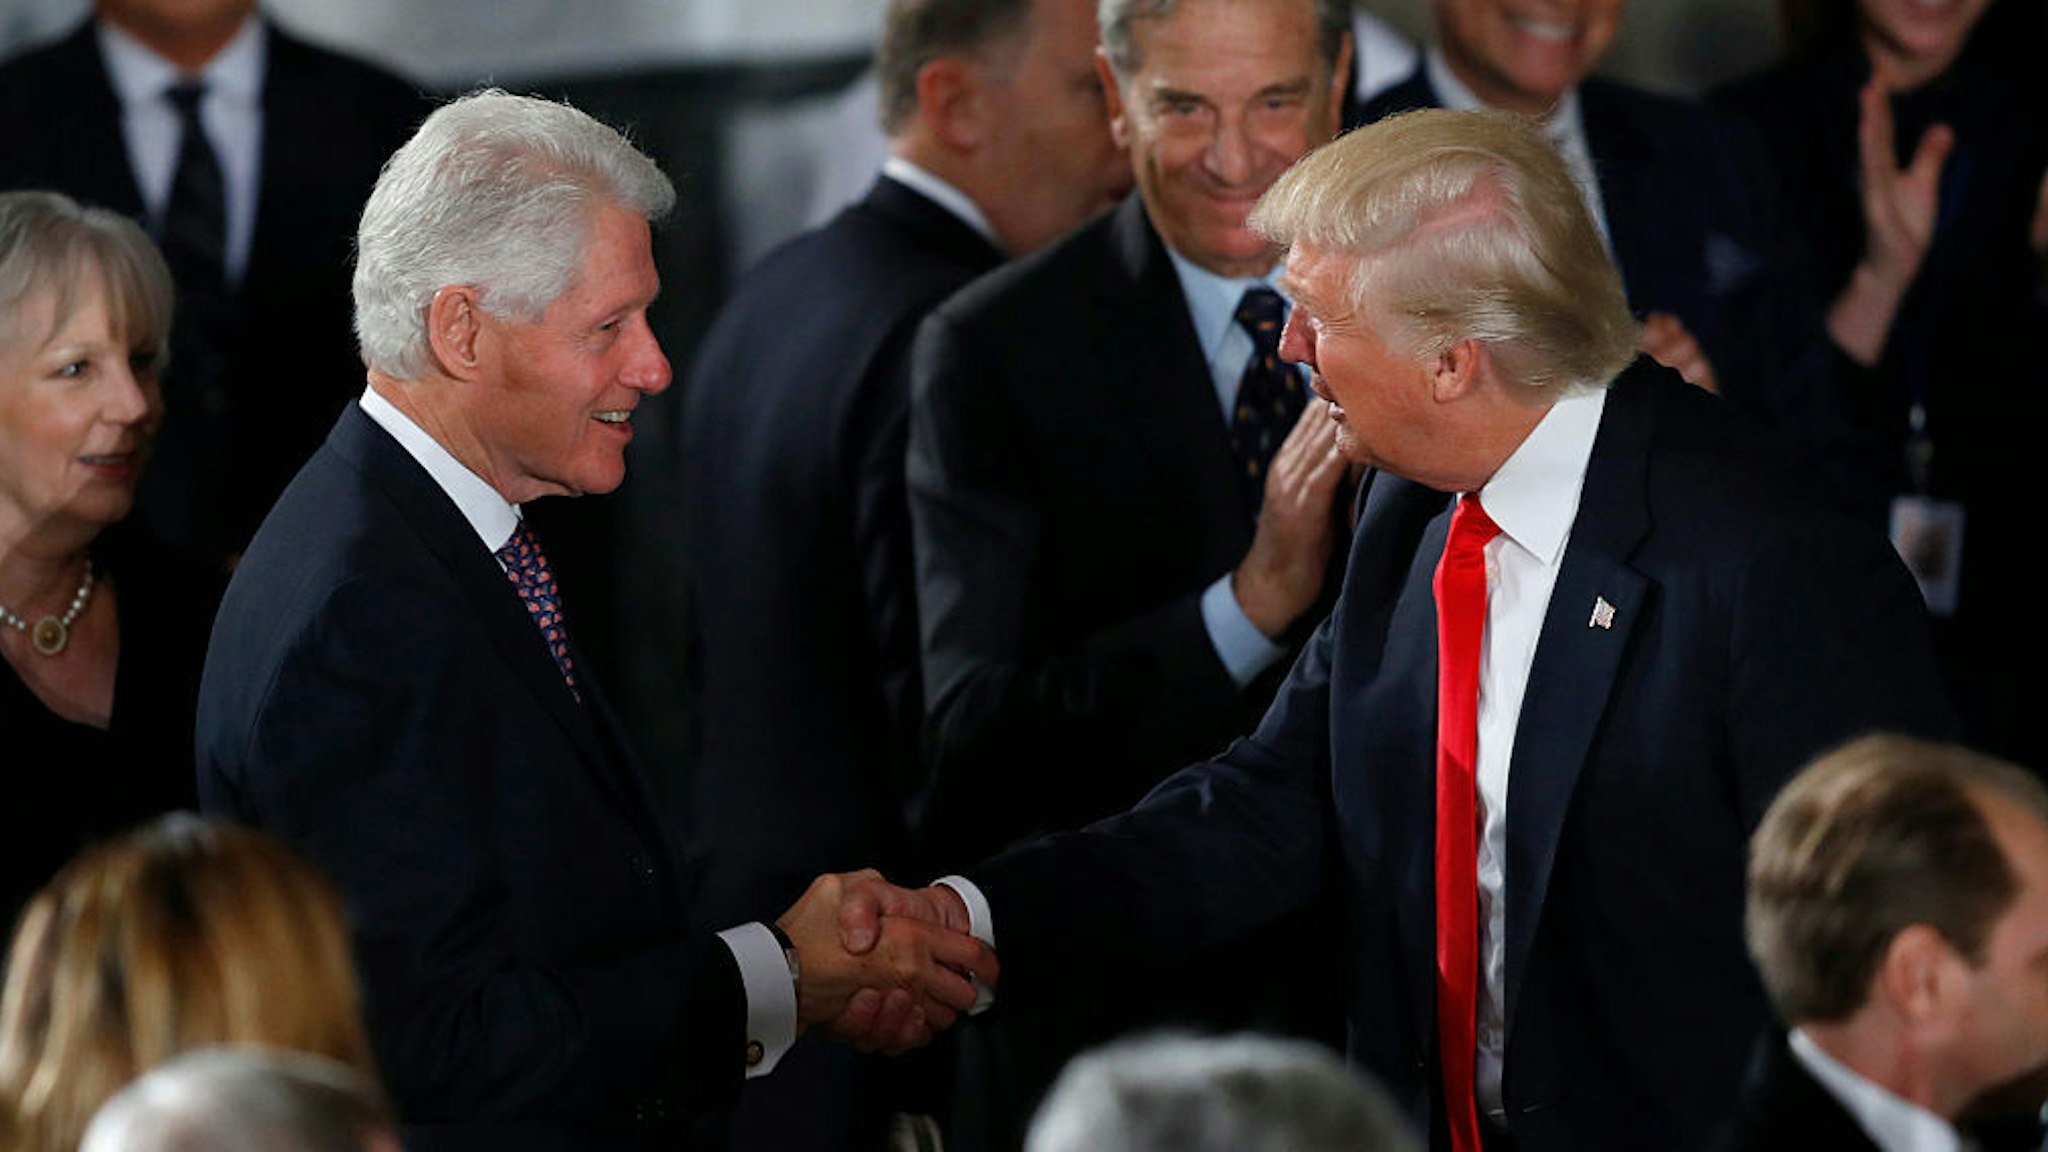 President Donald Trump greets former President Bill Clinton at the Inaugural Luncheon in the US Capitol January 20, 2017 in Washington, DC. President Trump will attend the luncheon along with other dignitaries. (Photo by Aaron P. Bernstein/Getty Images)